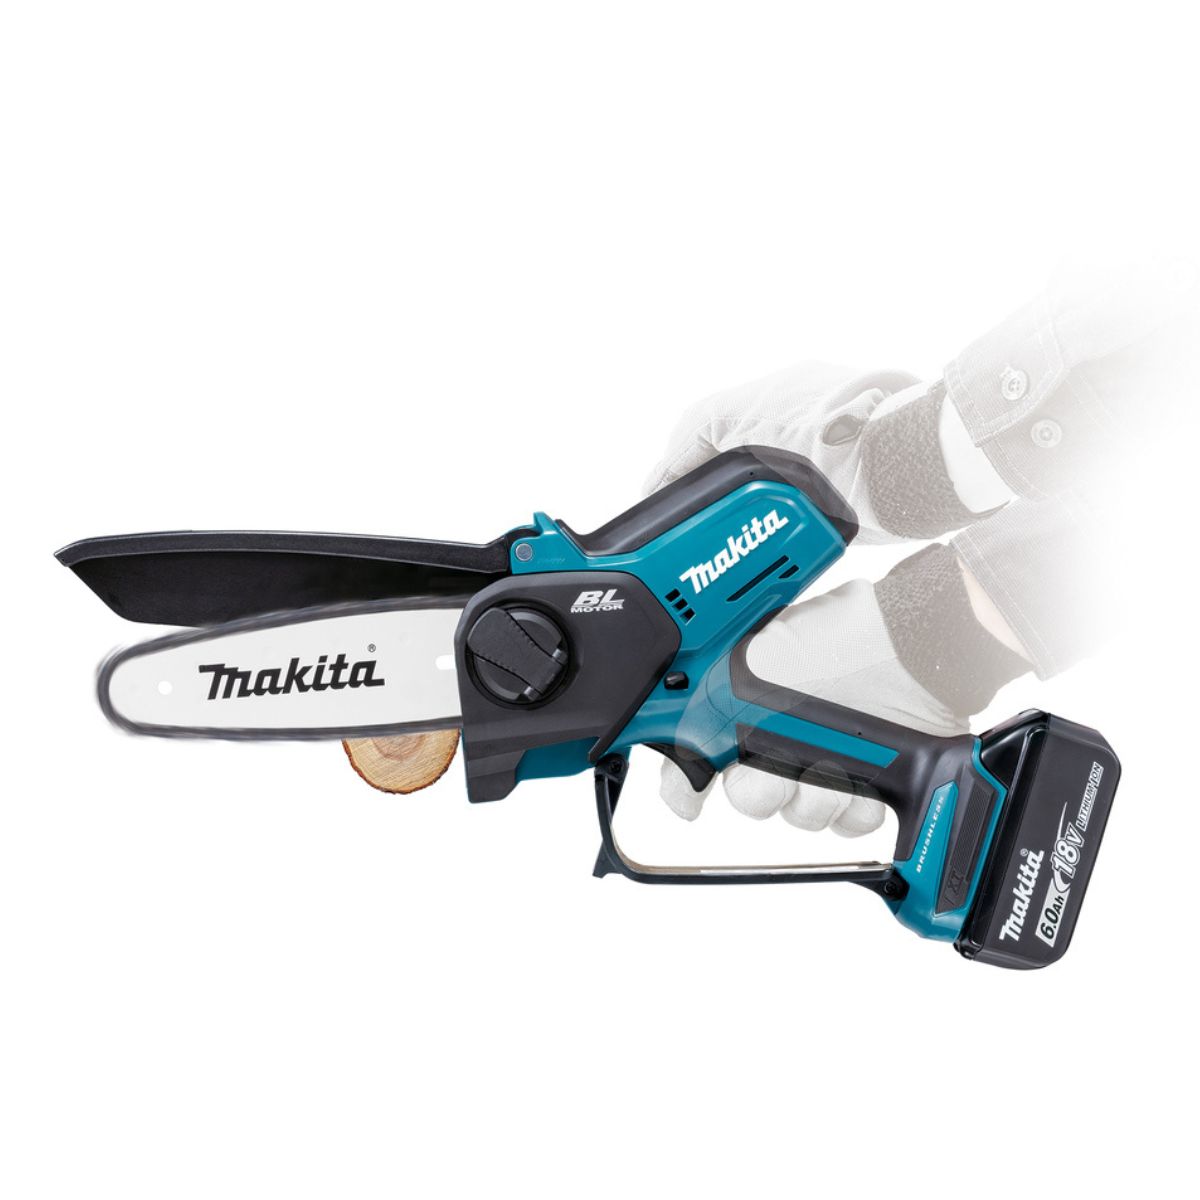 Makita DUC150Z 18V LXT Brushless 150mm Pruning Saw Body Only